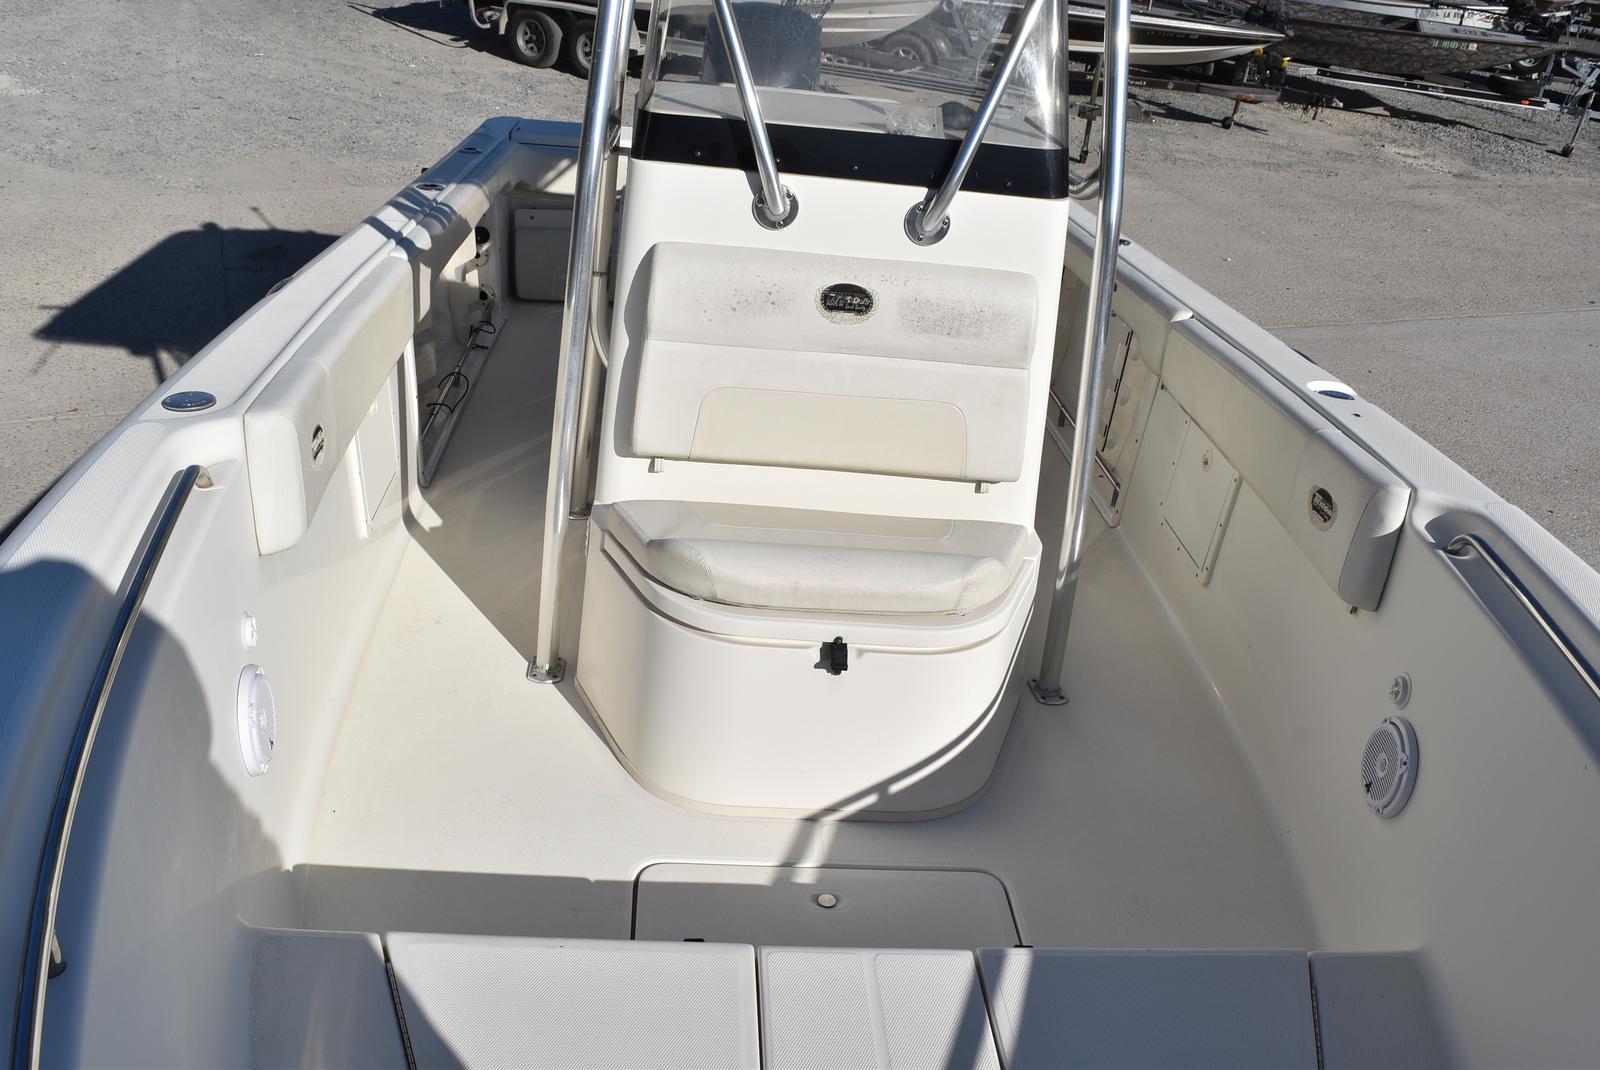 2006 Triton boat for sale, model of the boat is 2486 & Image # 6 of 24